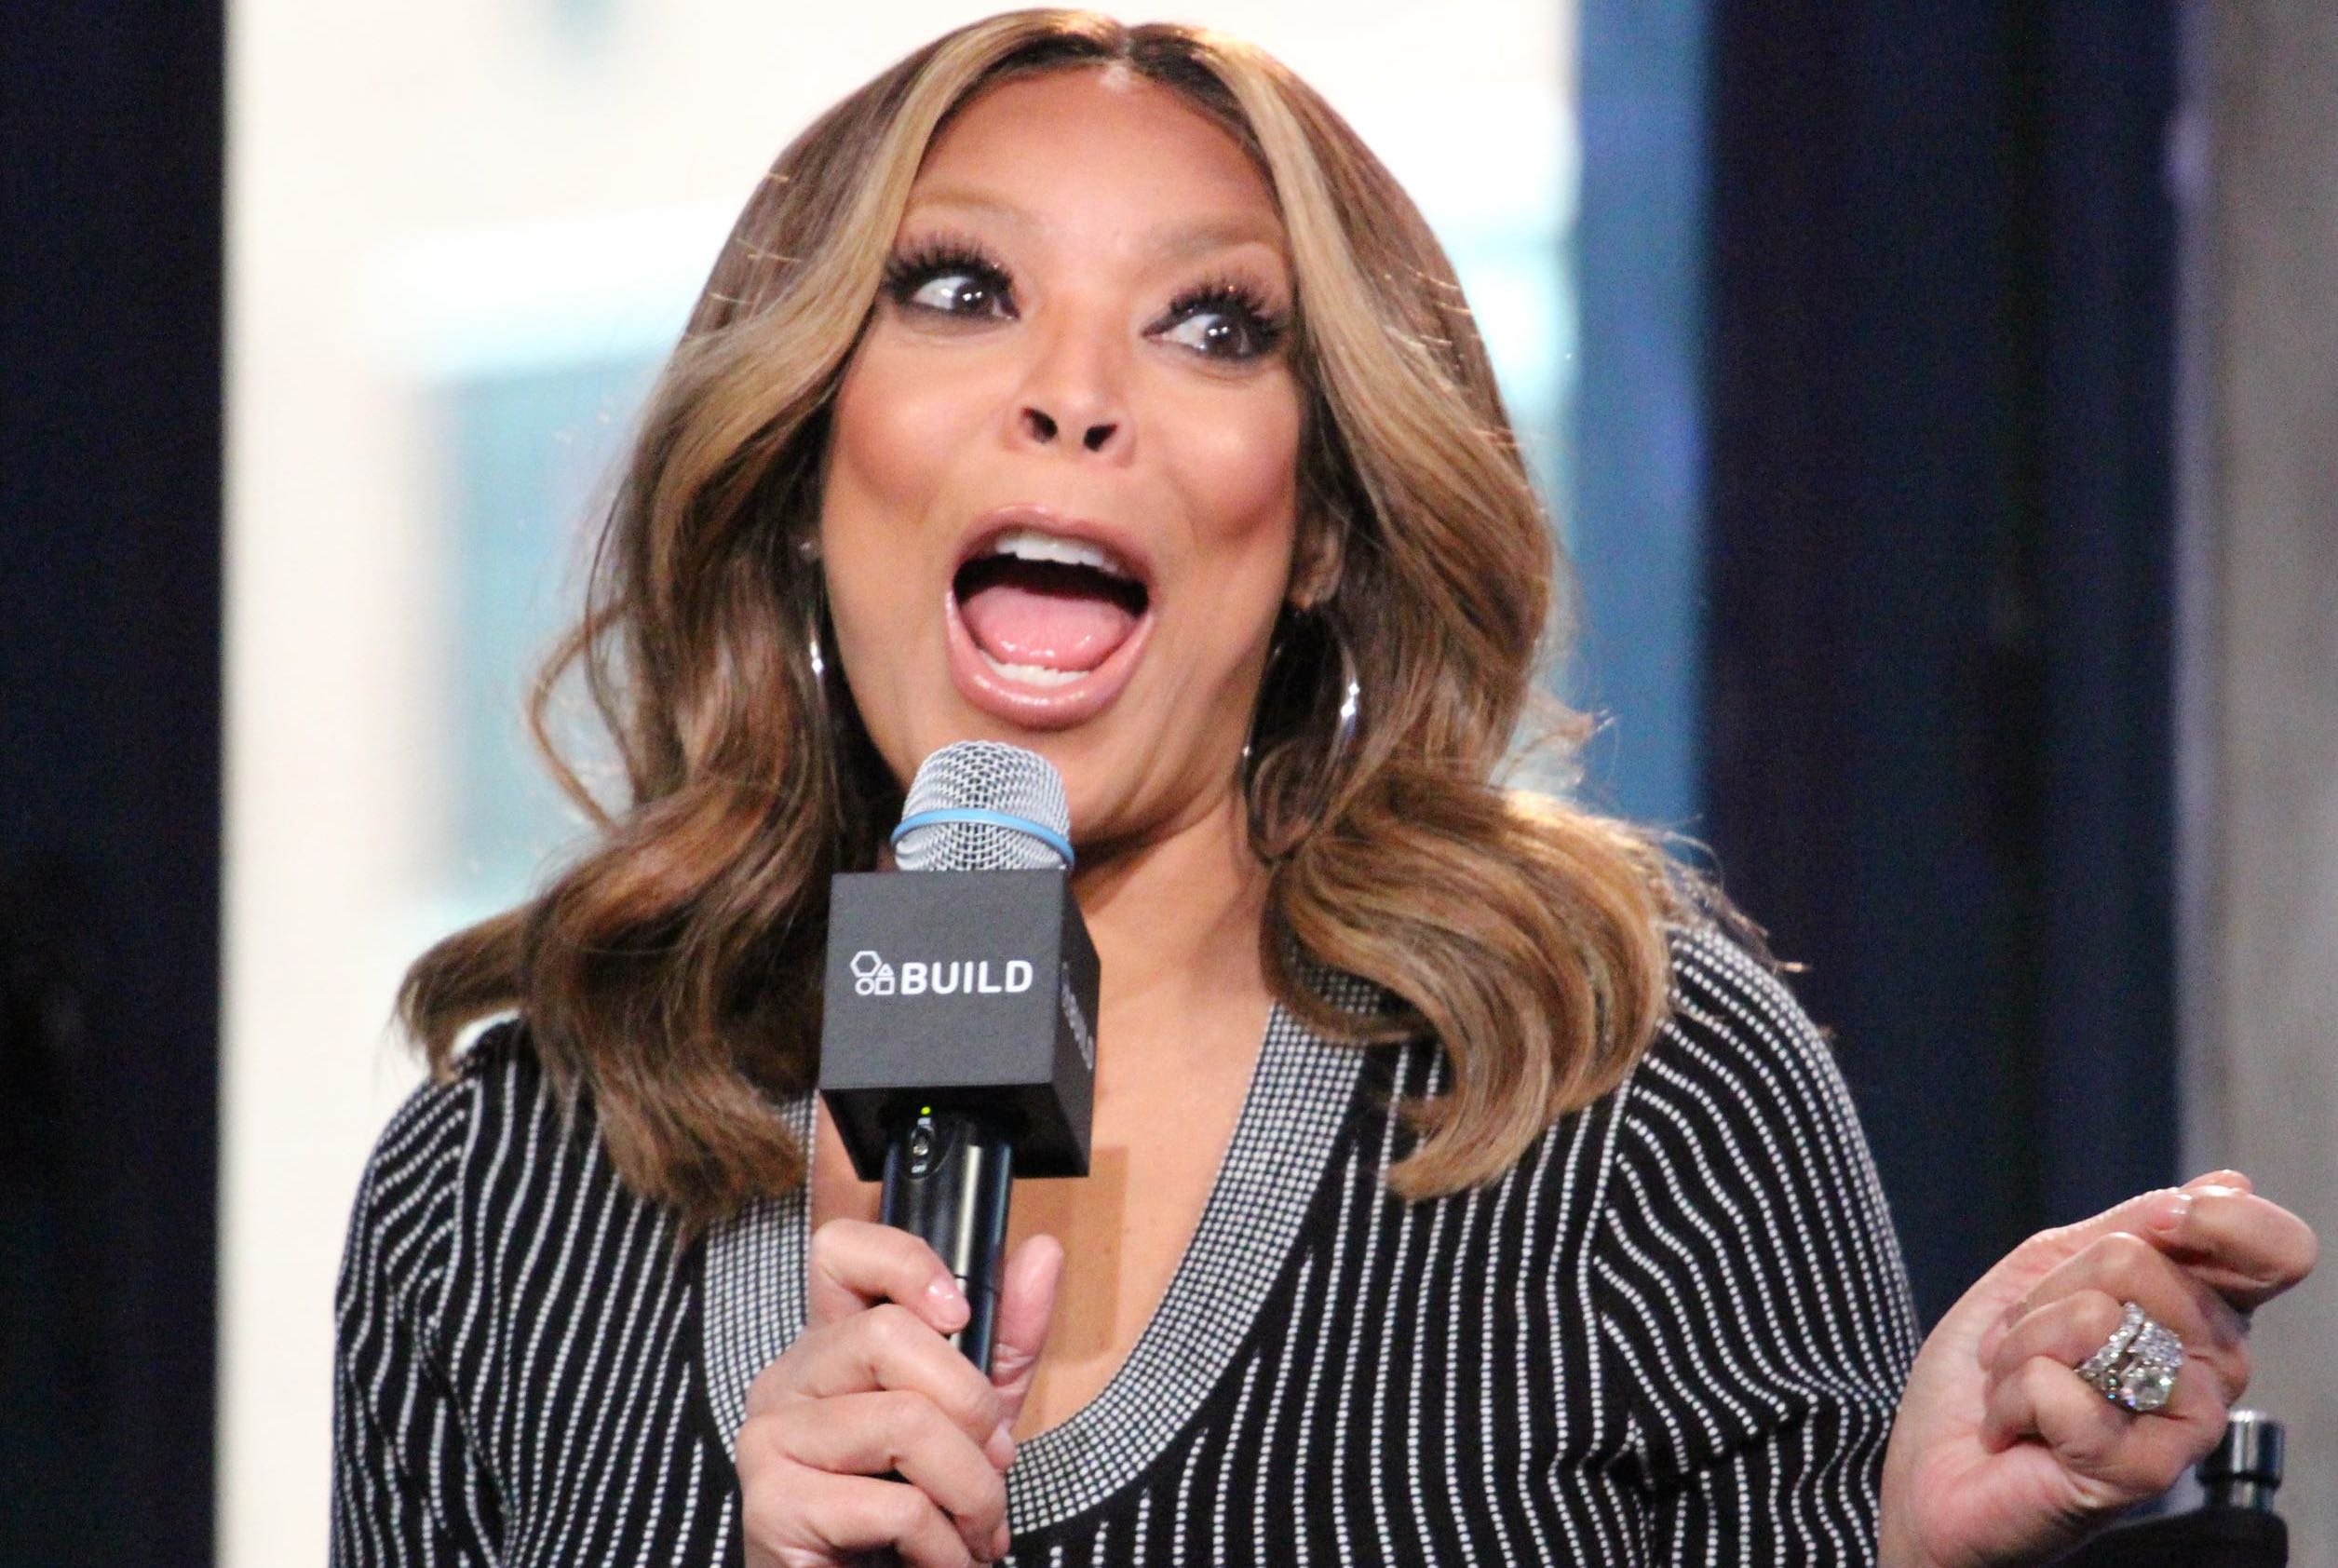 P Shaped Pixie Stick Wendy Williams Got Dragged To Pluto On Her Day Off